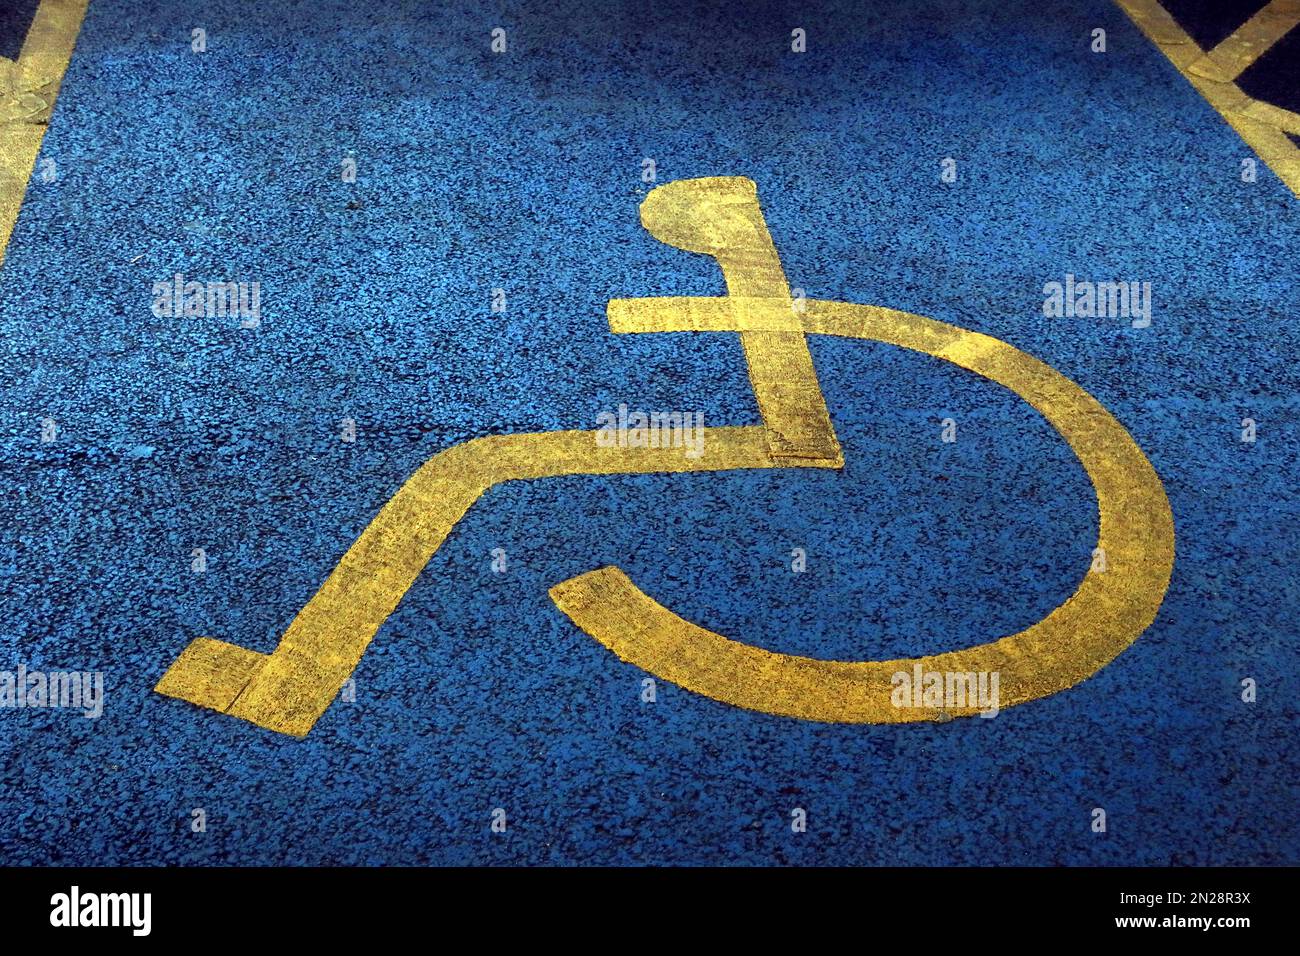 Textured surface on blue and yellow painted,disabled parking space NCP Stockport Stock Photo